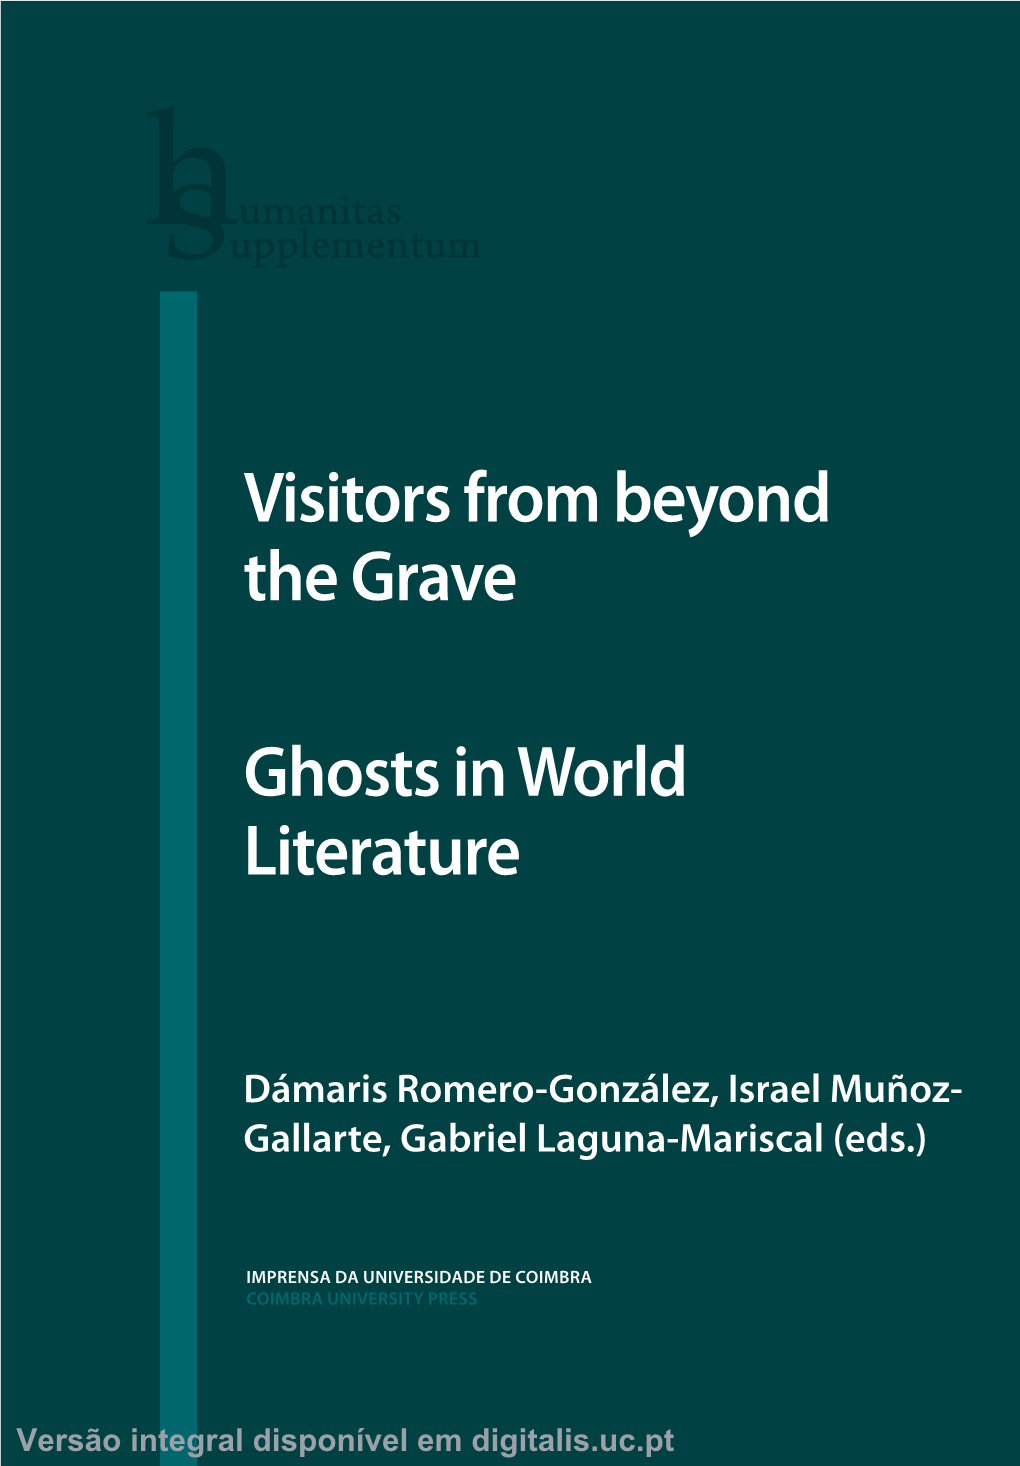 Visitors from Beyond the Grave Ghosts in World Literature